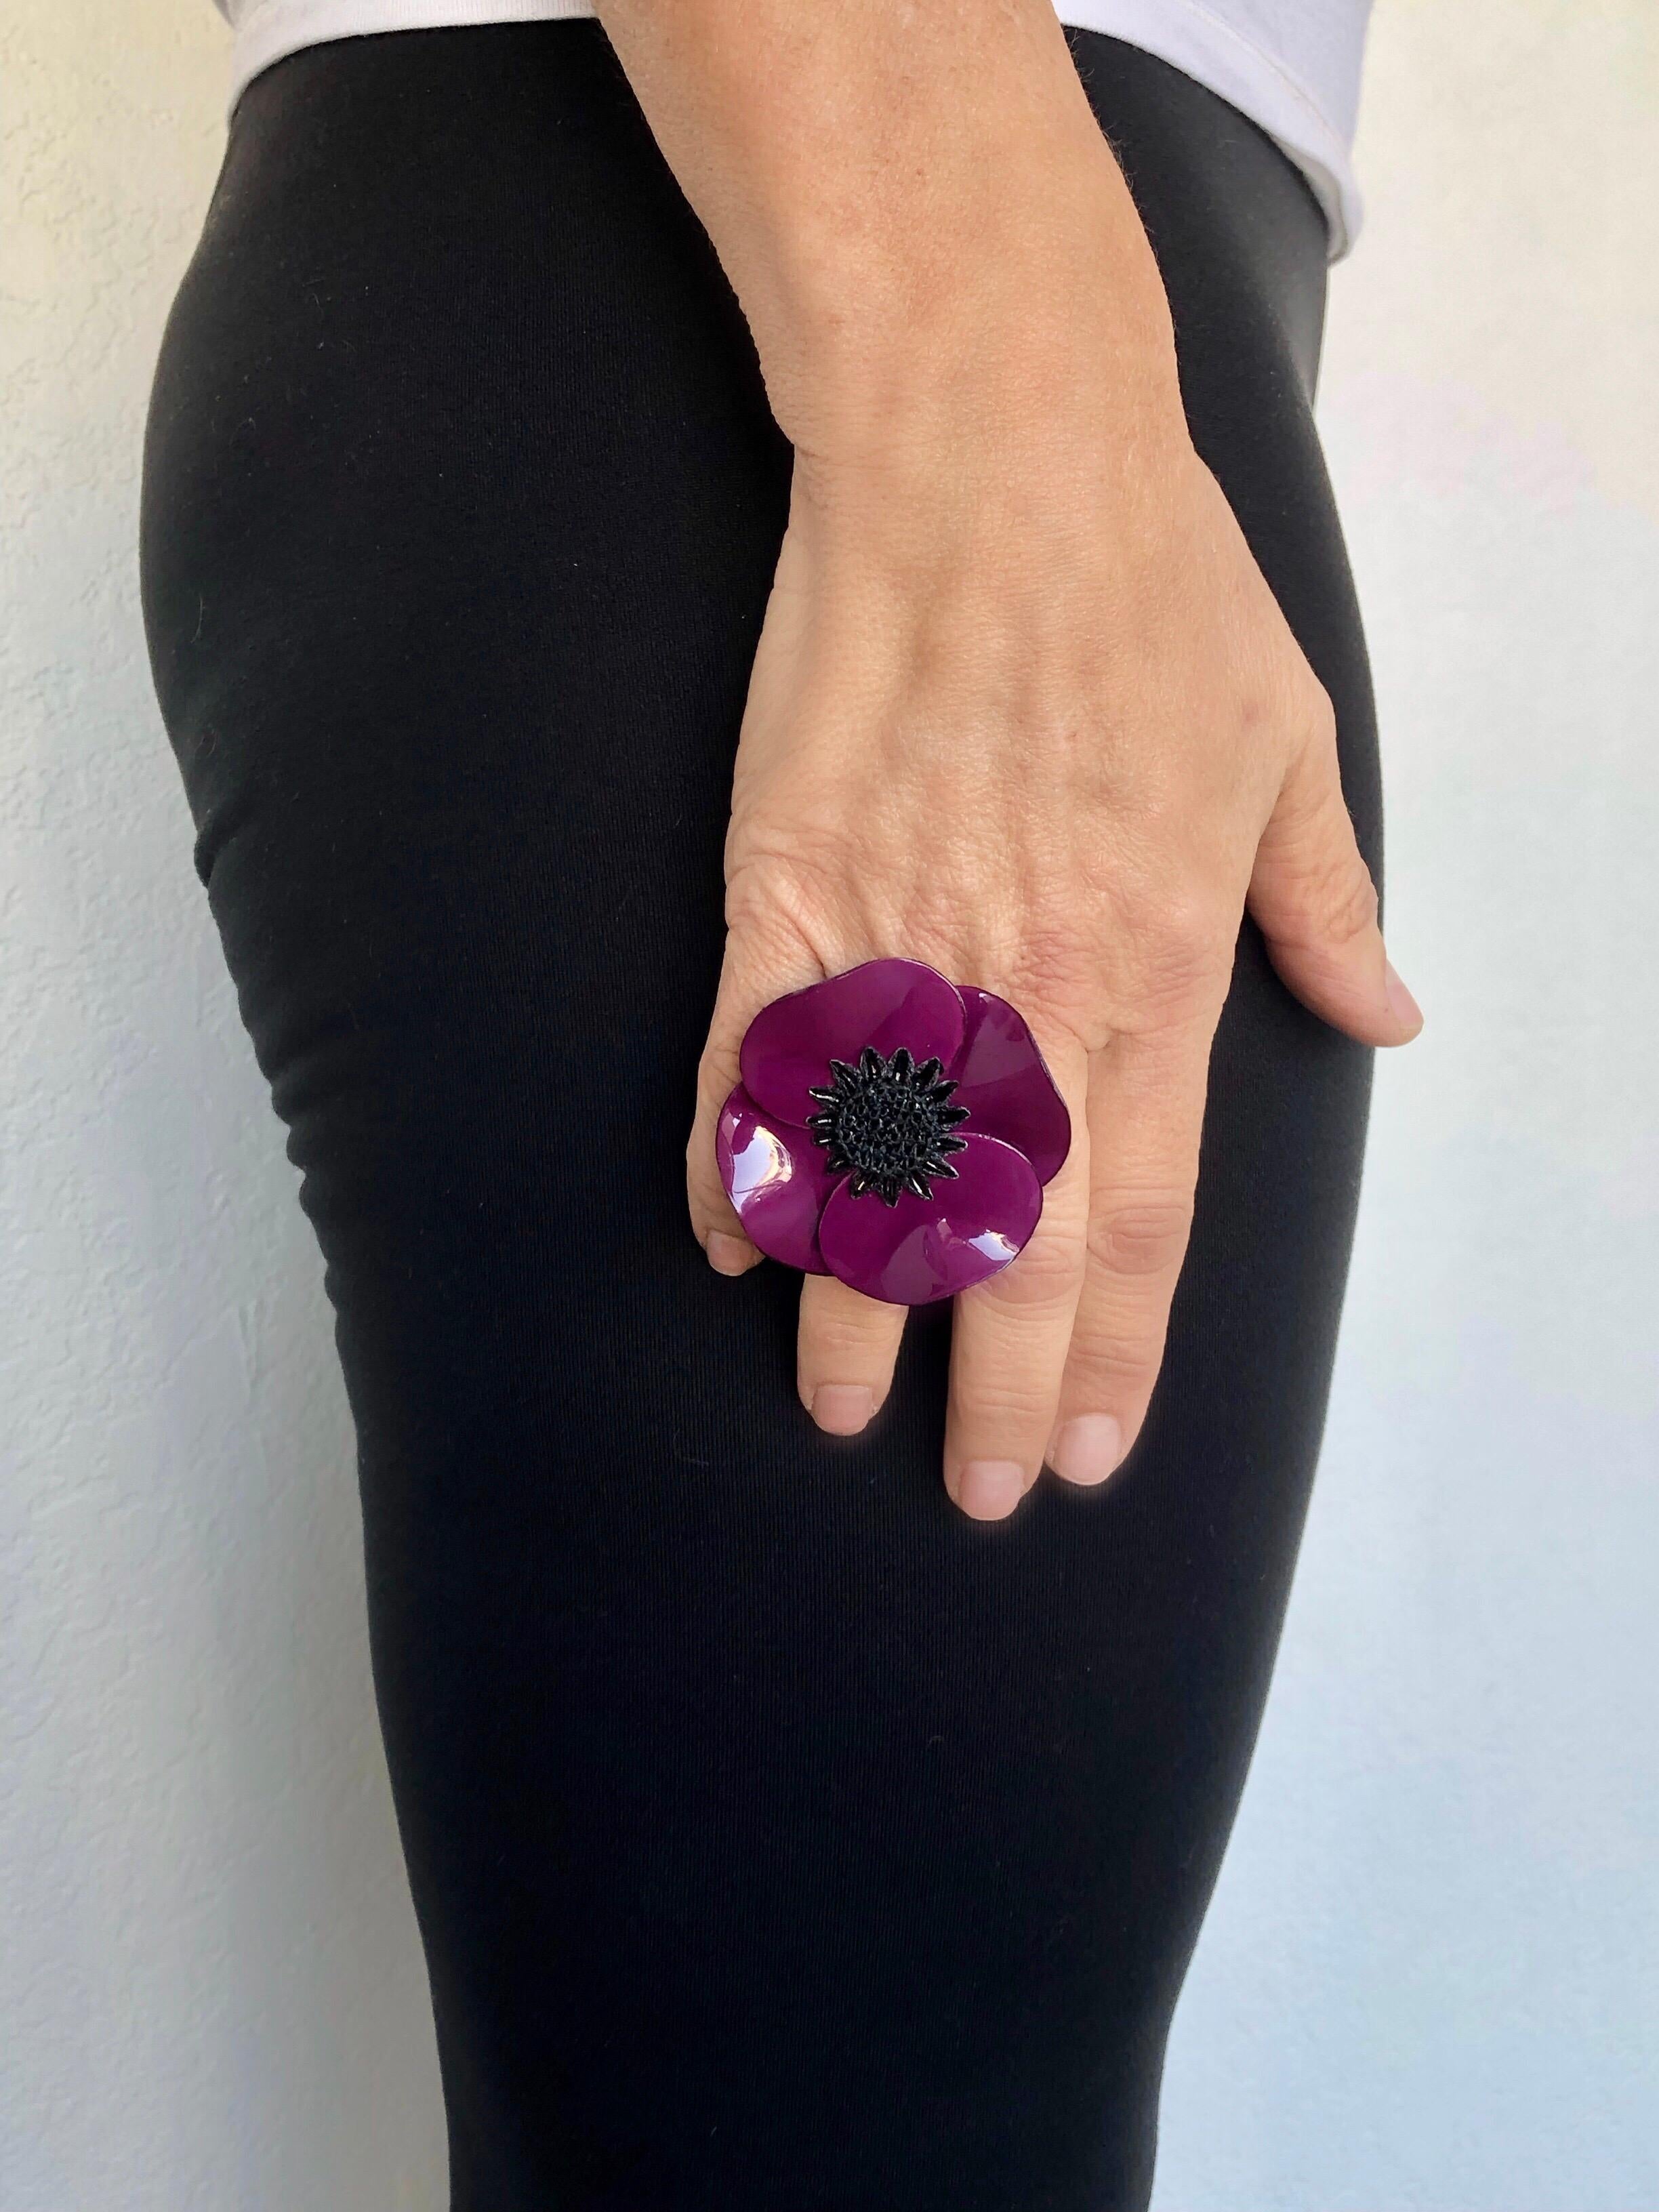 Light and easy to wear, this adjustable artisanal ring was made in Paris by Cilea. The lightweight adjustable ring feature a single architectural enameline (enamel and resin composite) purple poppy flower. The poppy is oversized and features a black